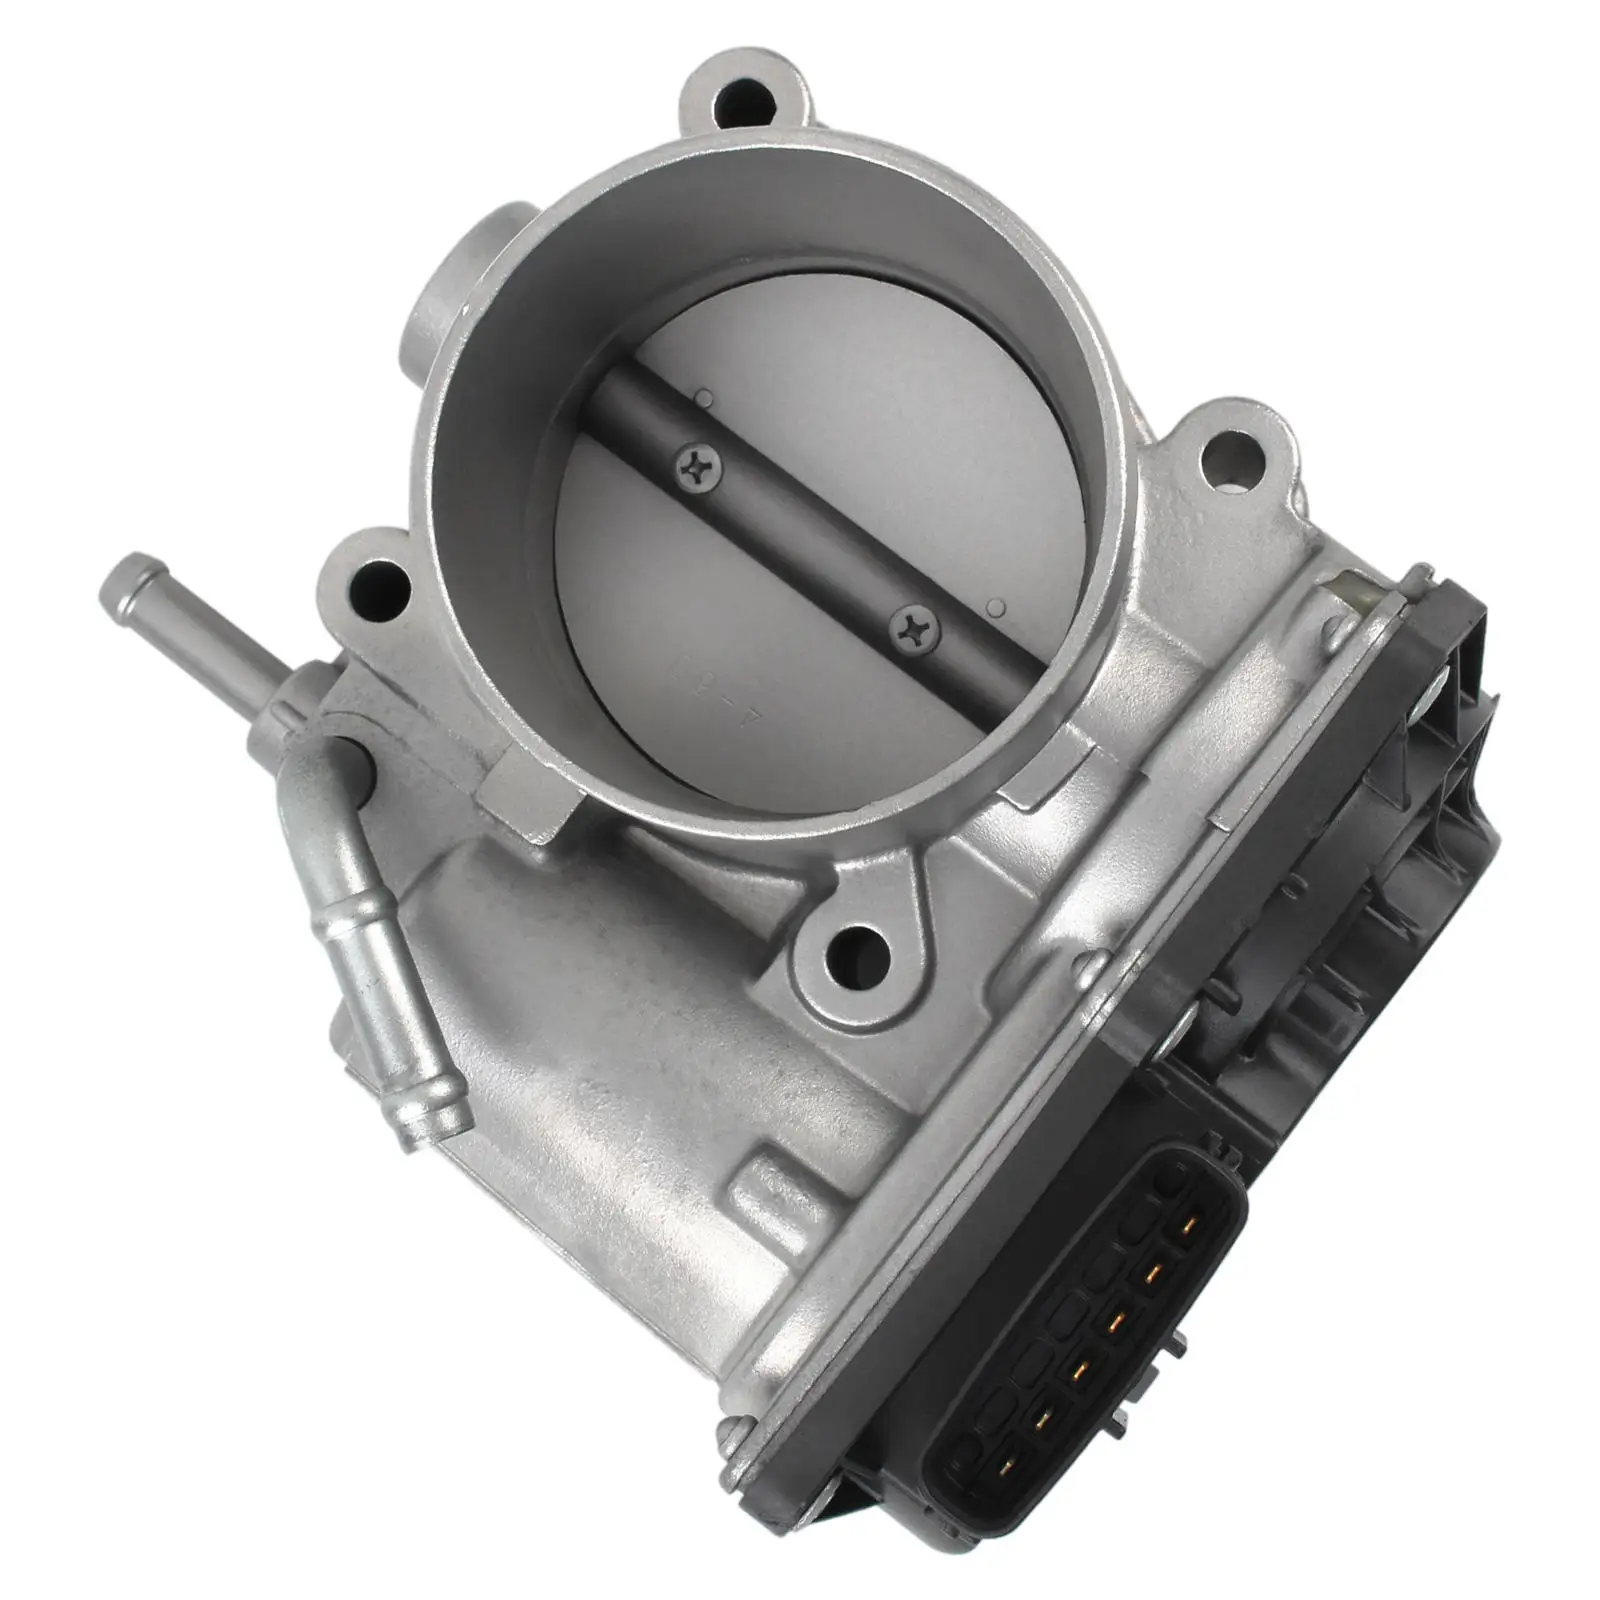 Throttle Body Valve, 16112AA010, Vehicle Parts, Accessories Replace 16112AA230 Automotive Car Supplies Fit for Outback Forester